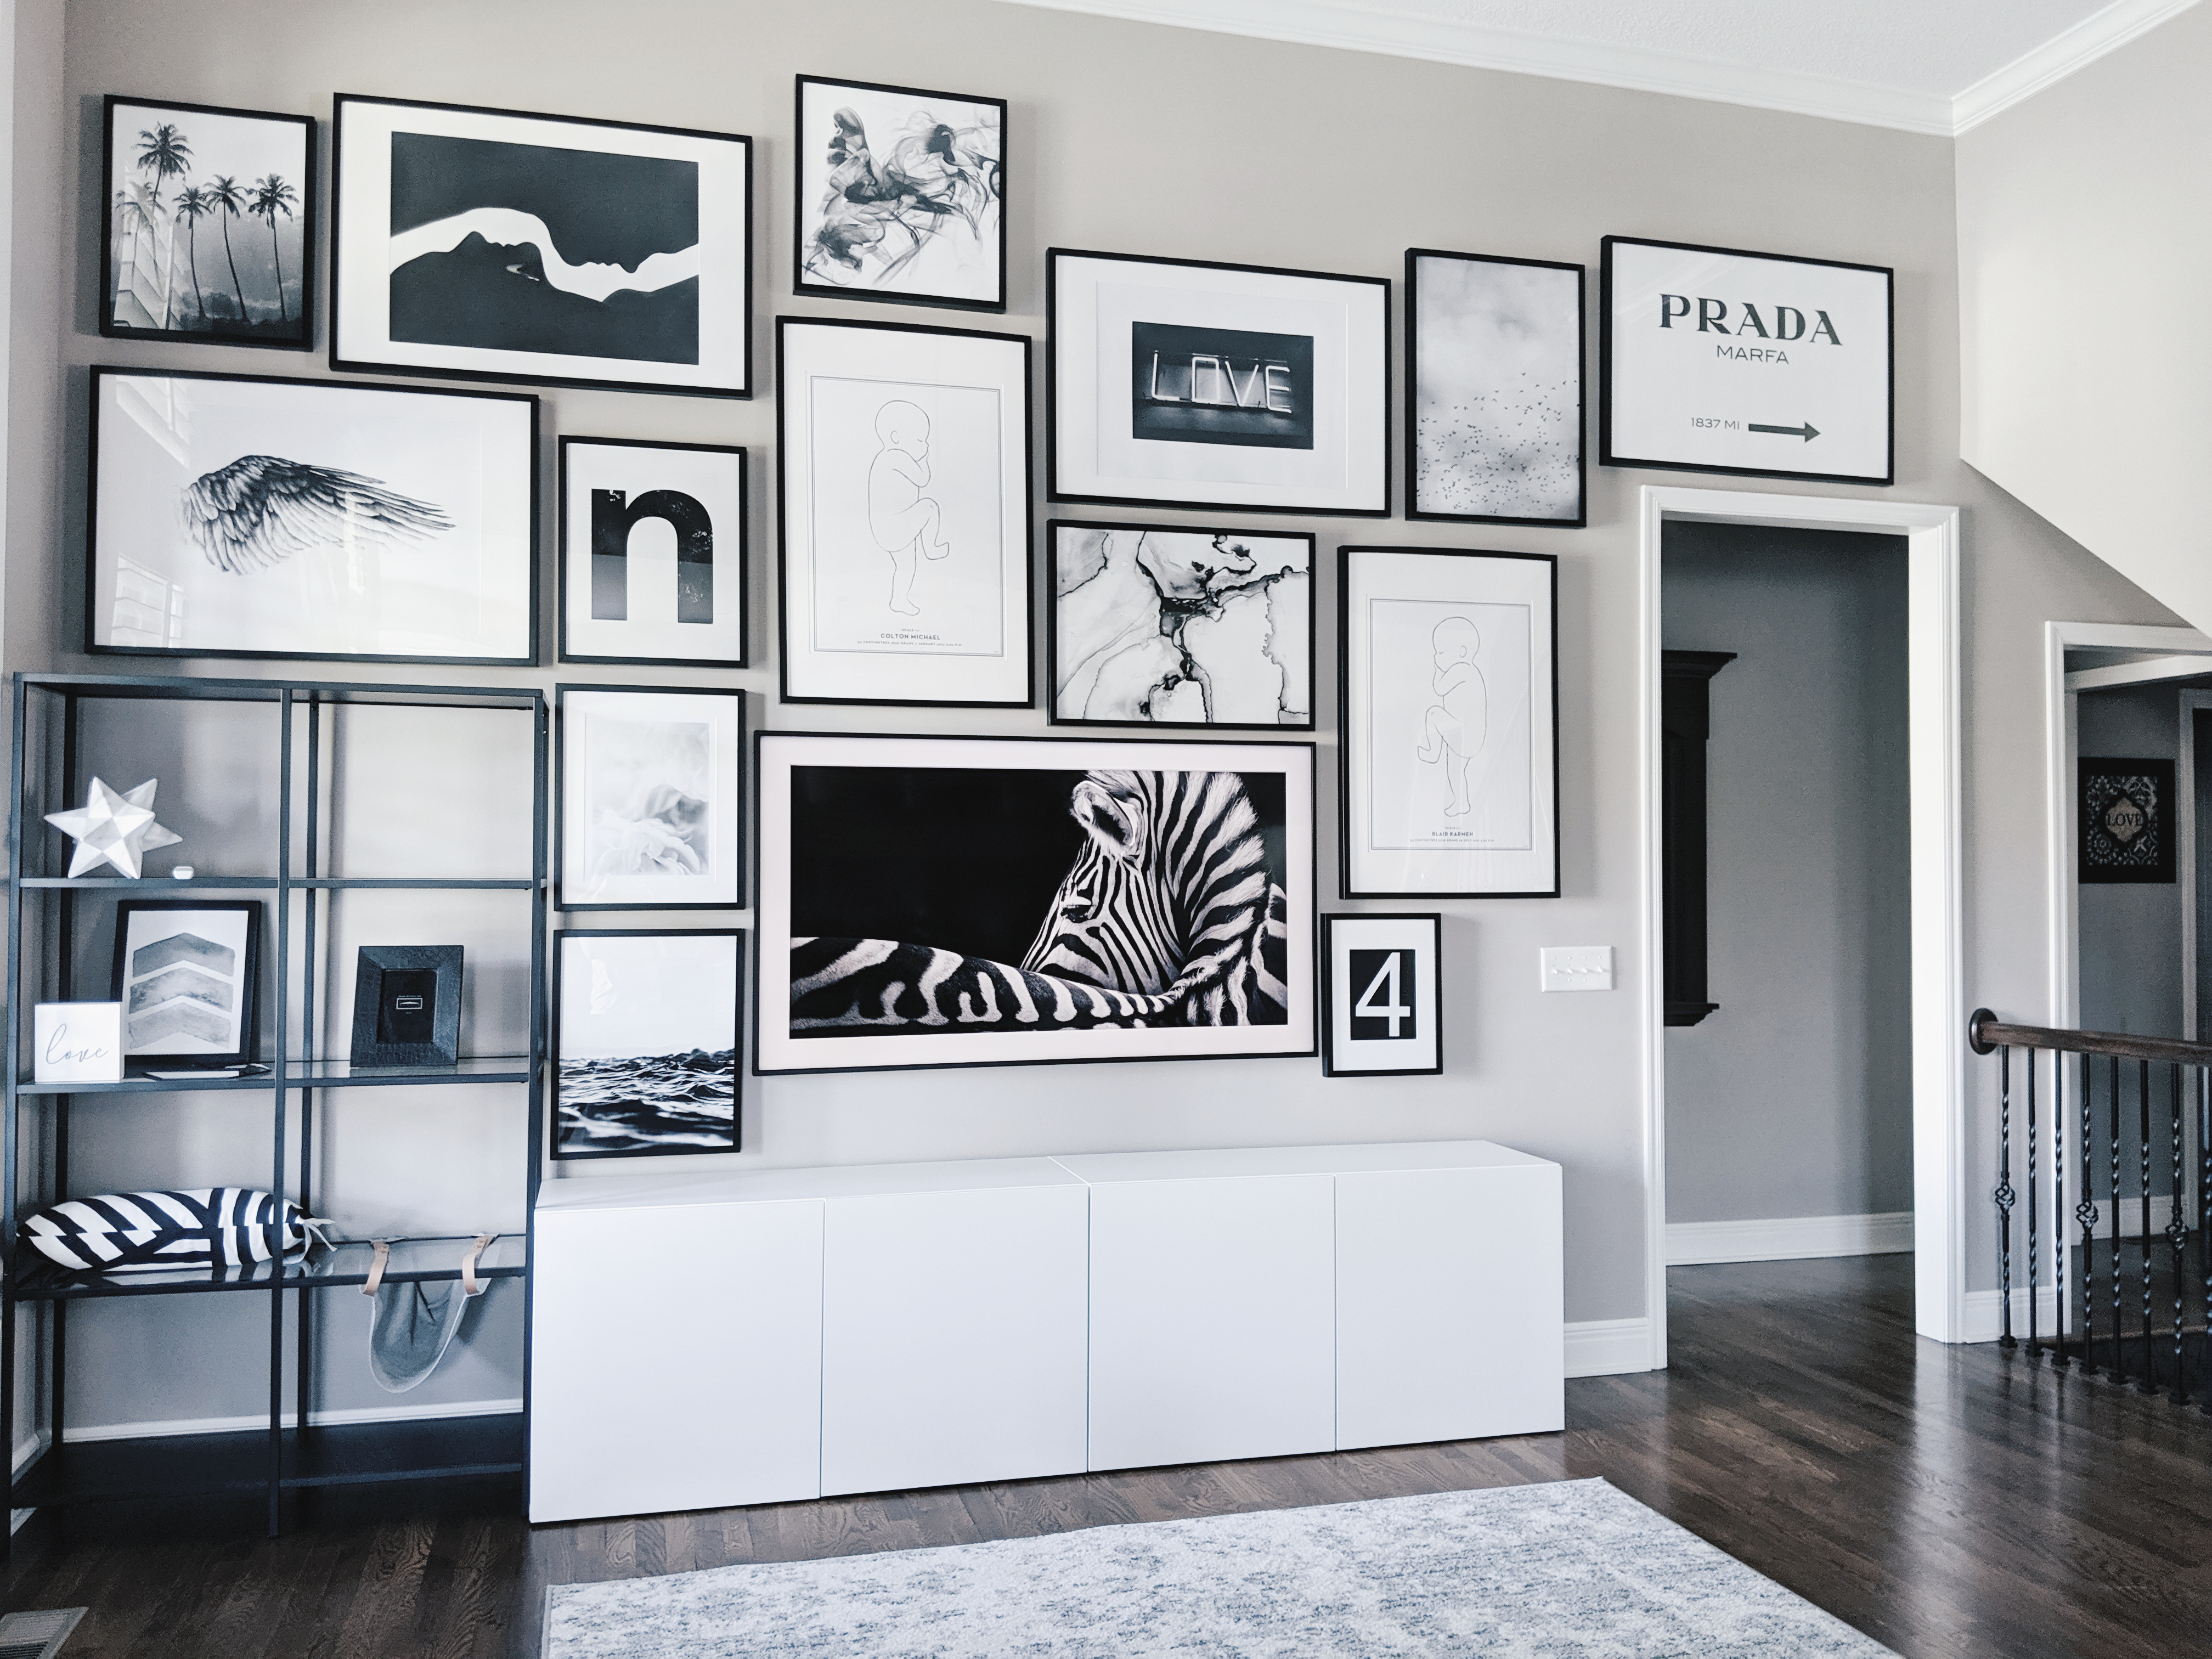 Living Room Gallery Wall Ideas: Looking for gallery wall ideas? This black and white gallery wall is a total showstopper. This is one of the best gallery walls I've ever seen! Includes Desenio posters, Samsung The Frame TV, Ikea Besta as a TV stand, Ikea Ribba frame gallery wall, Ikea Vittsjo shelves. #gallerywall #blackandwhite #monochrome